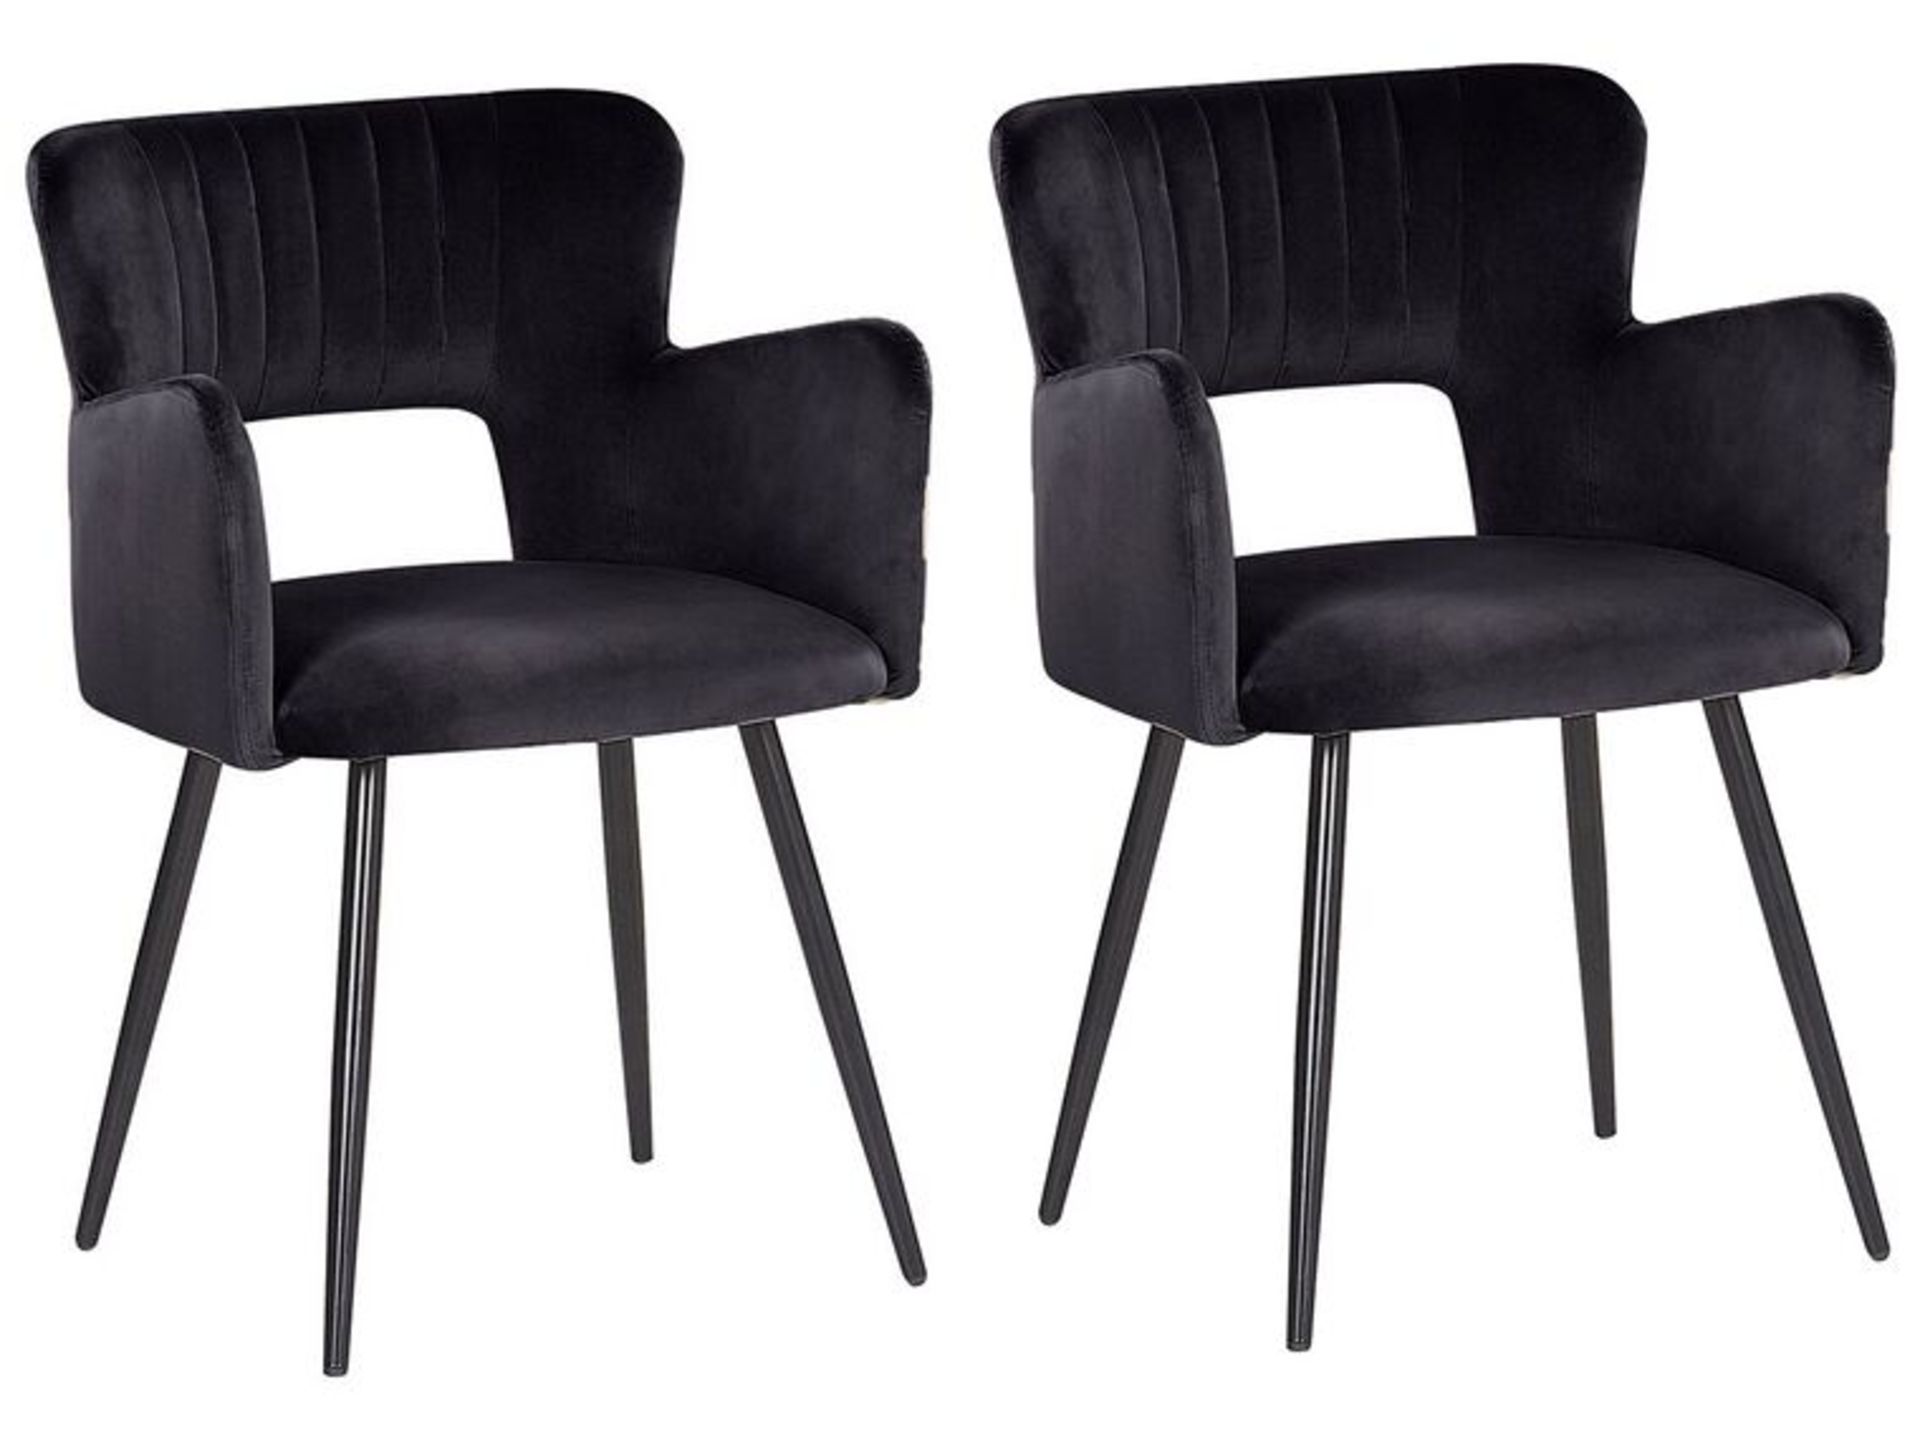 Sanilac Set of 2 Velvet Dining Chairs Black. - SR6. RRP £249.99. These chairs are all about modern